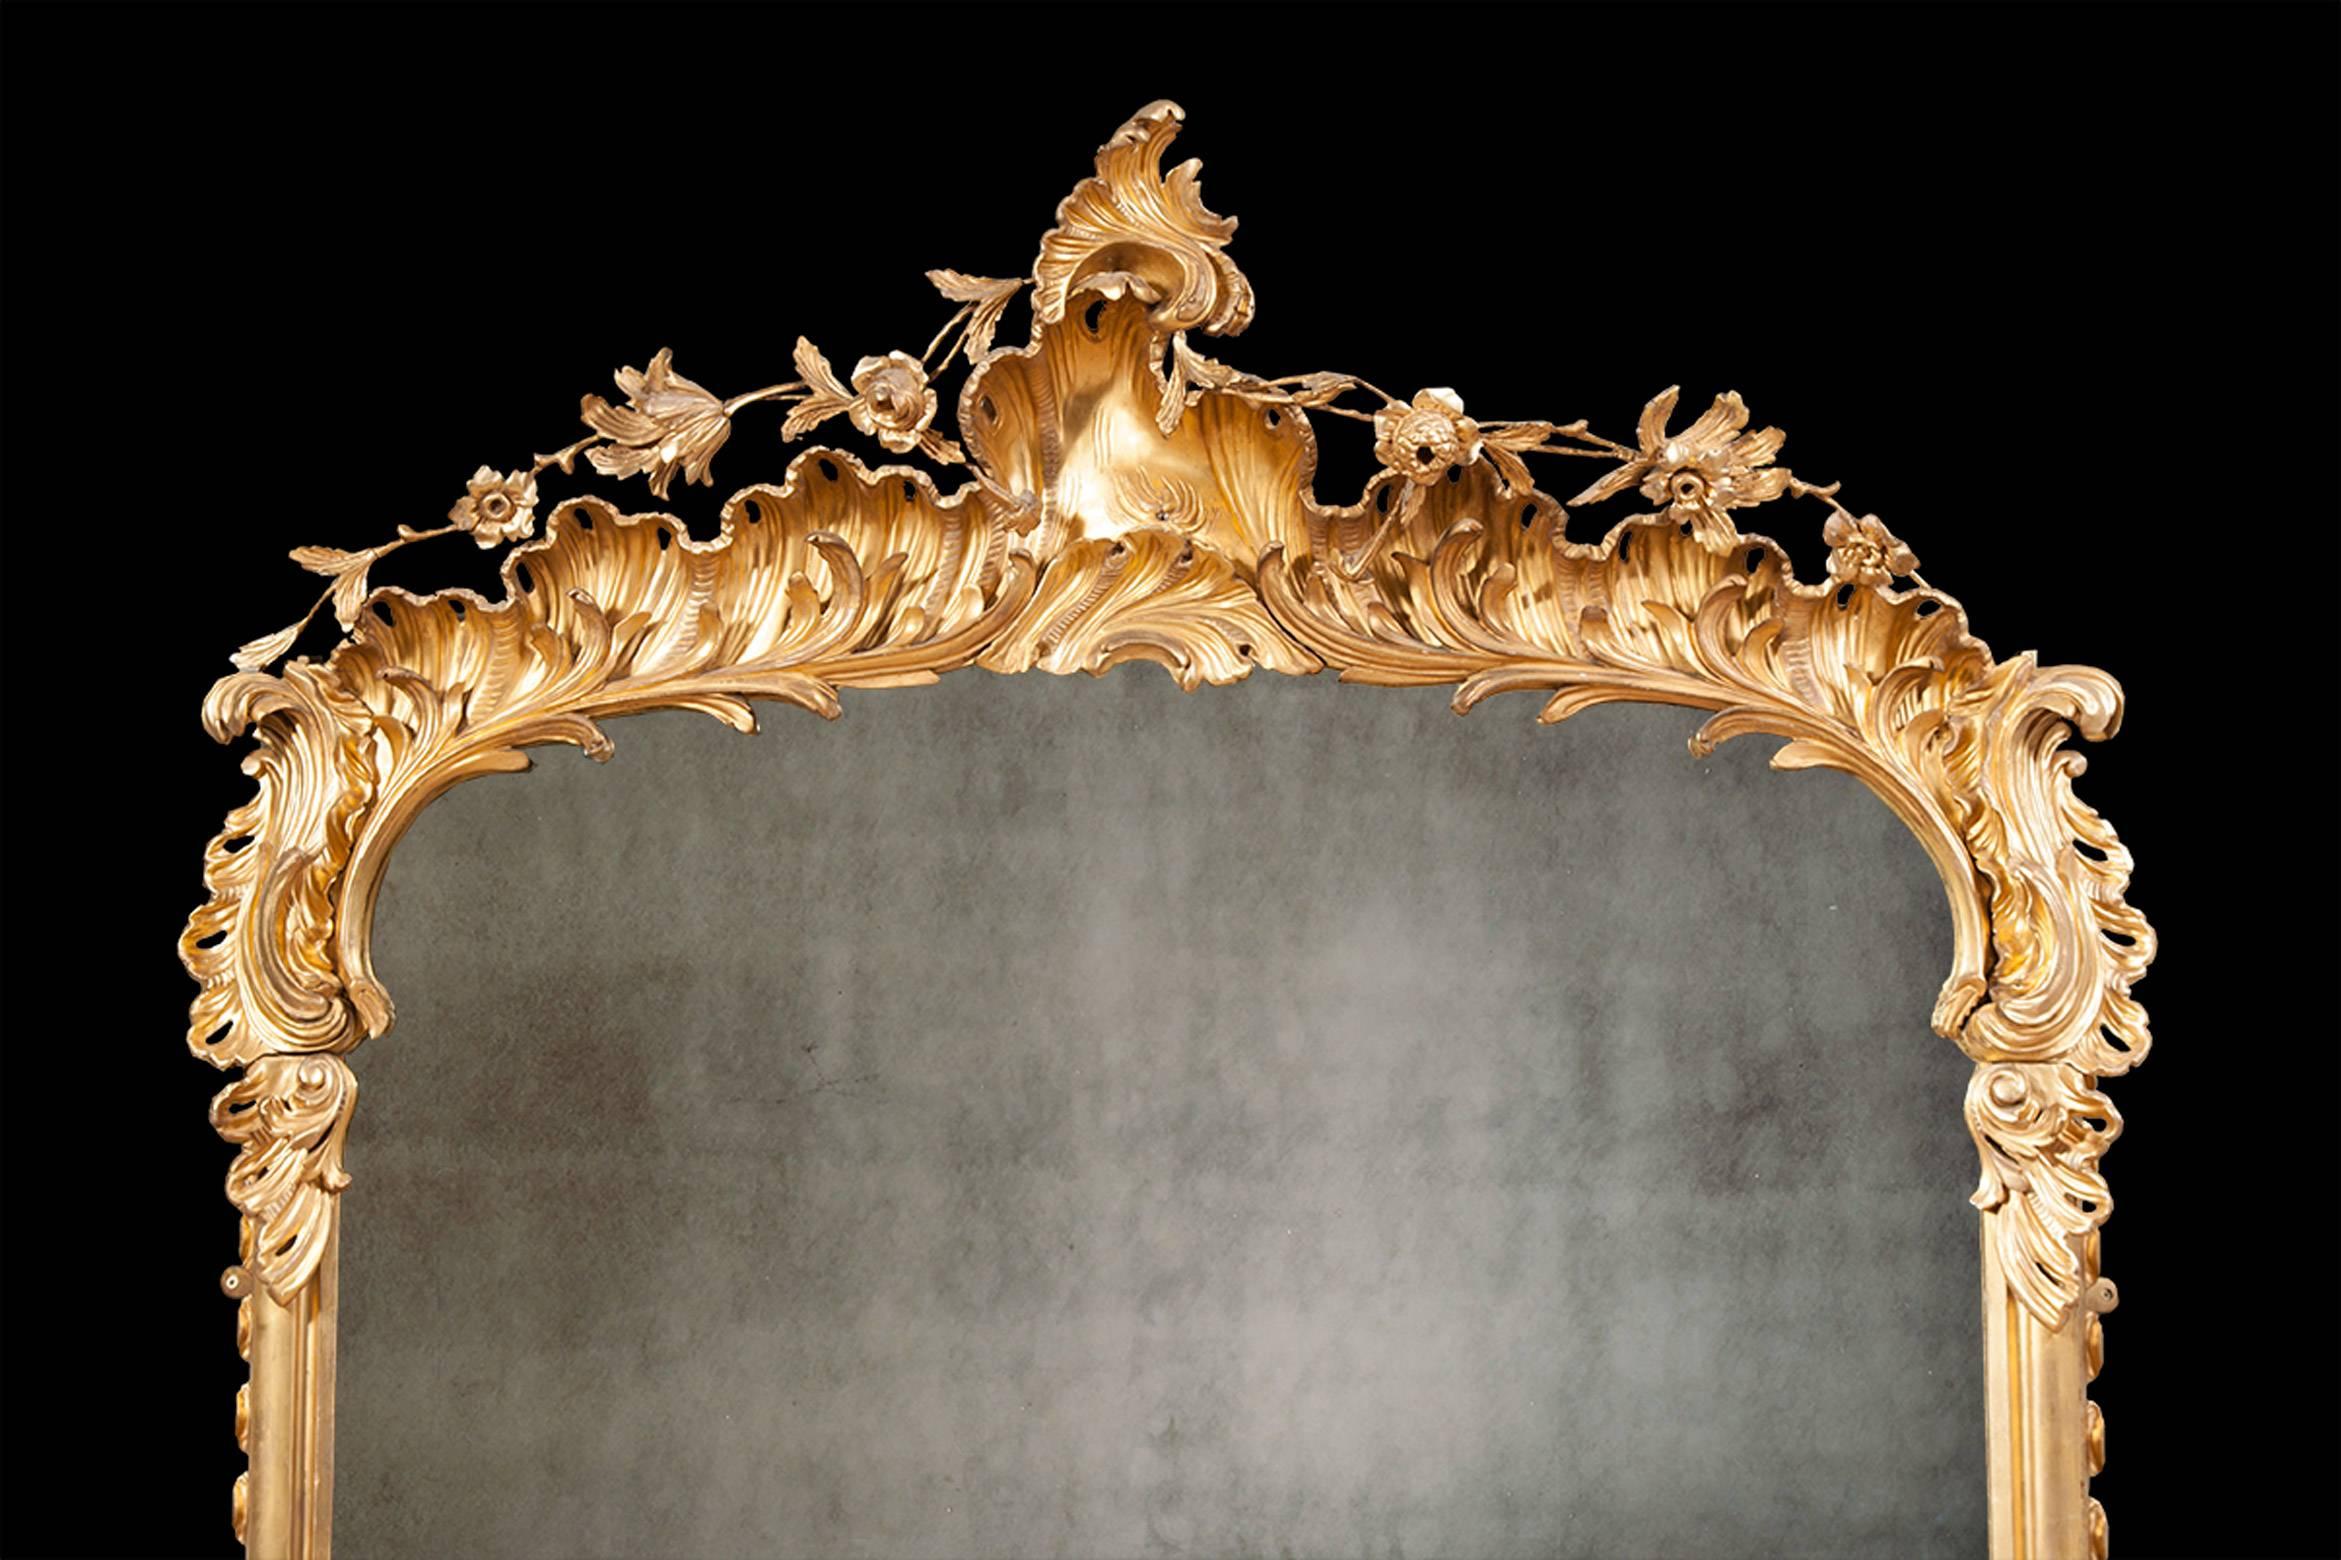 An exceptional matching pair of mid-19th century Irish giltwood overmantel mirrors. With ornate floral crests, elaborate acanthus leaf decoration and crisp carvings throughout. These mirrors would sit very comfortably on either fireplace mantels or